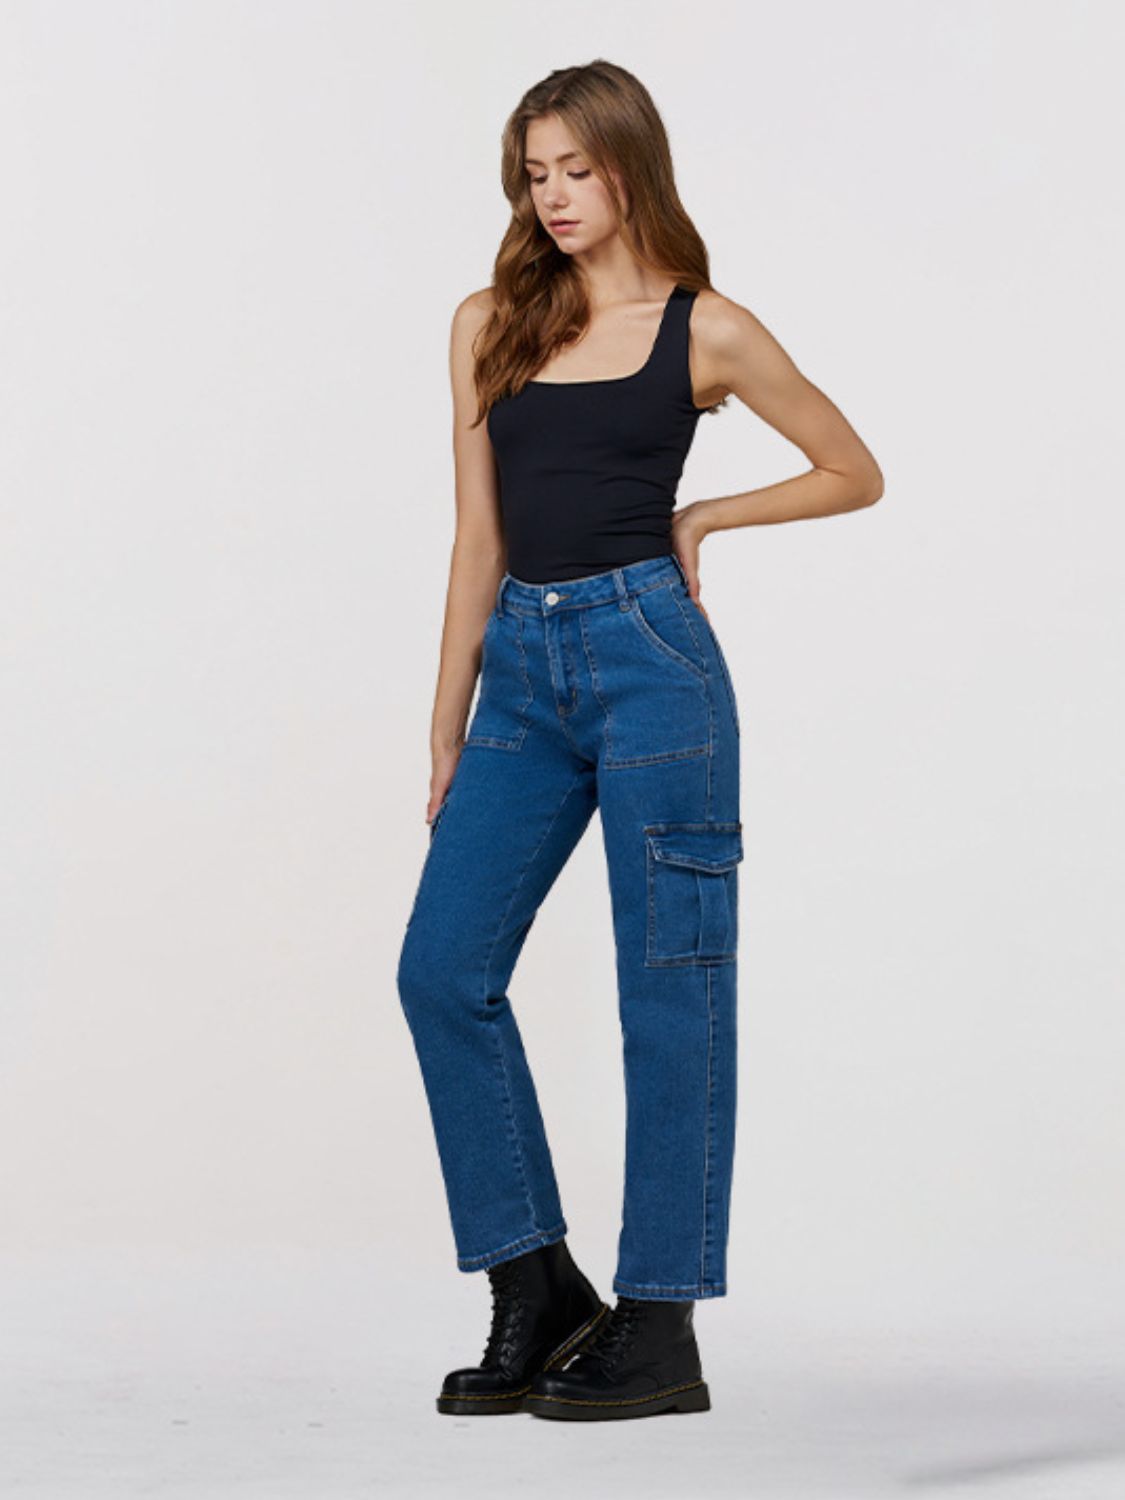 Classy Straight Leg Jeans with Pockets